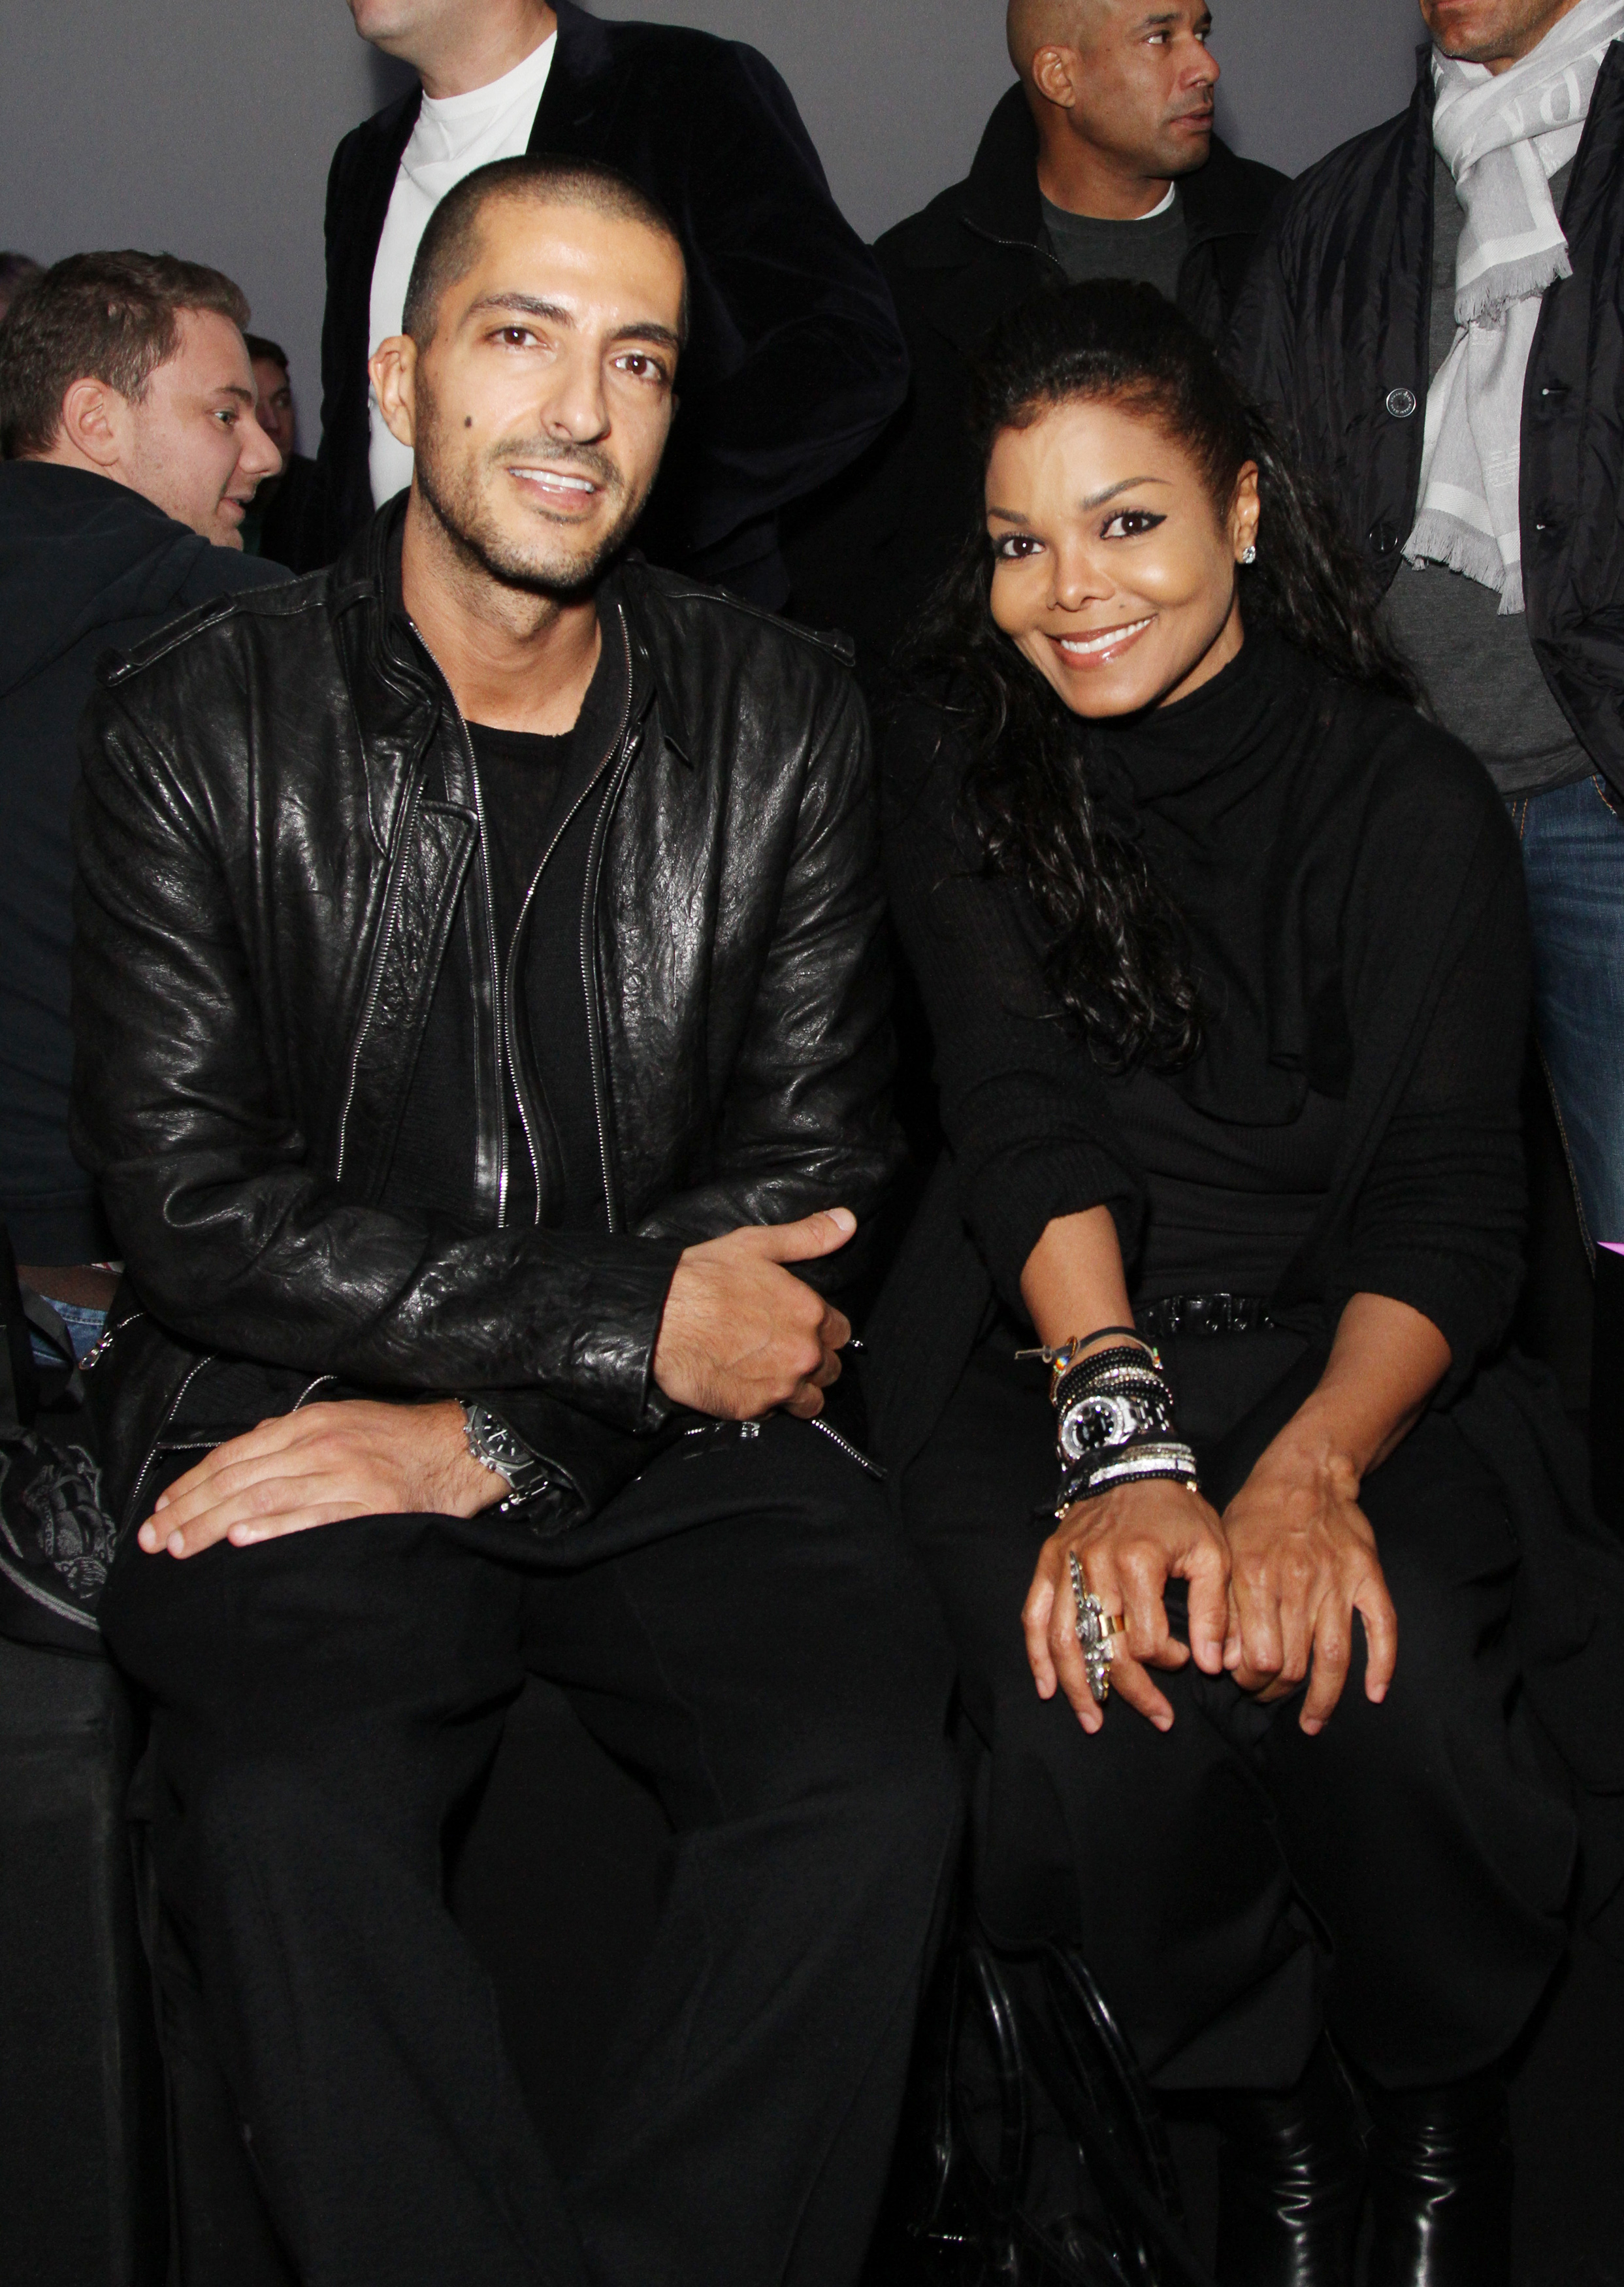 Wissam Al Mana and Janet Jackson attend Kira Plastinina's fashion show on October 25, 2012 in Moscow, Russia. | Source: Getty Images